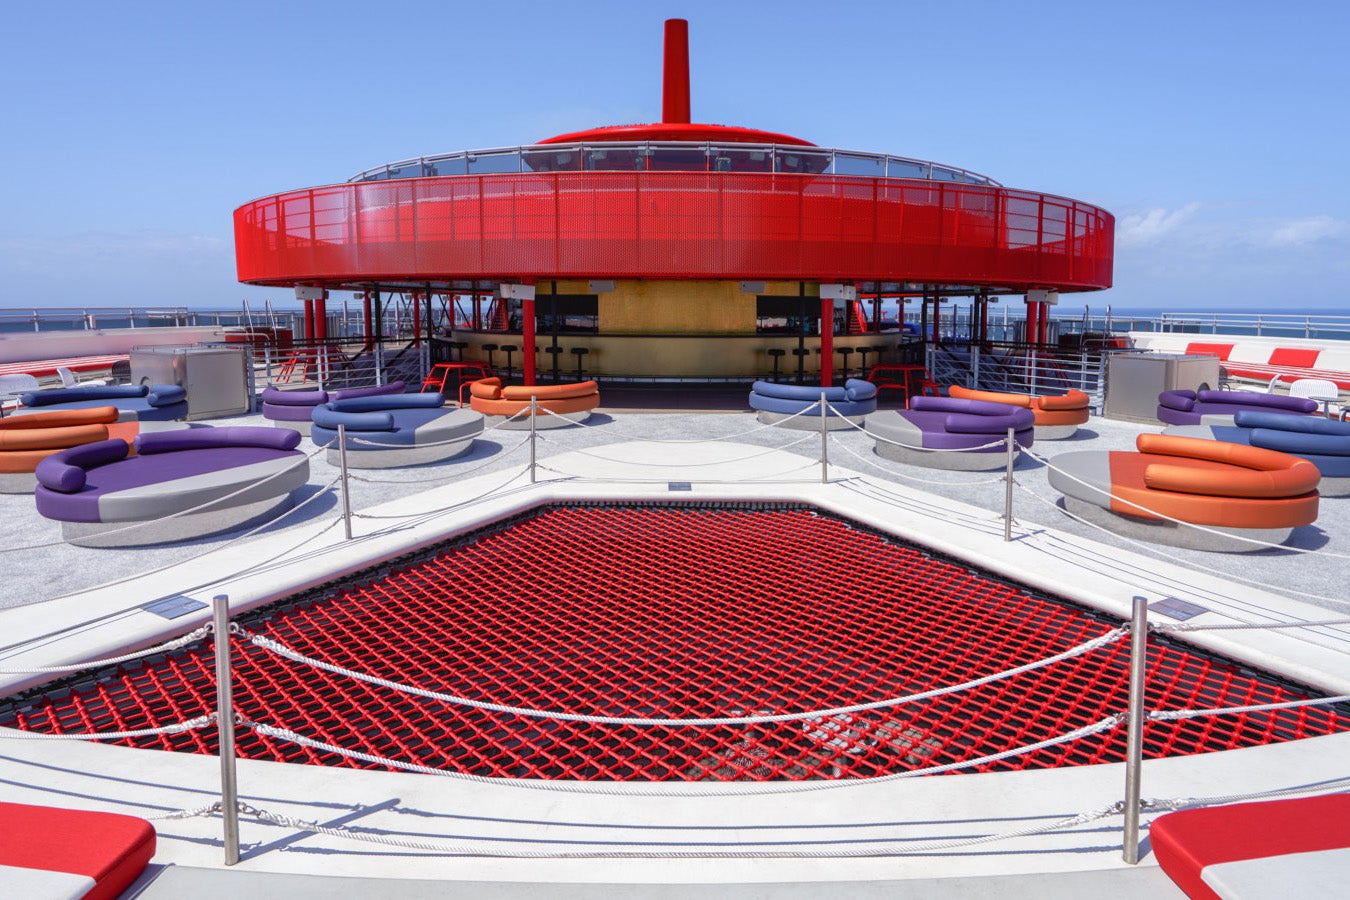 Red-roofed circular cruise ship bar with red netting in the foreground